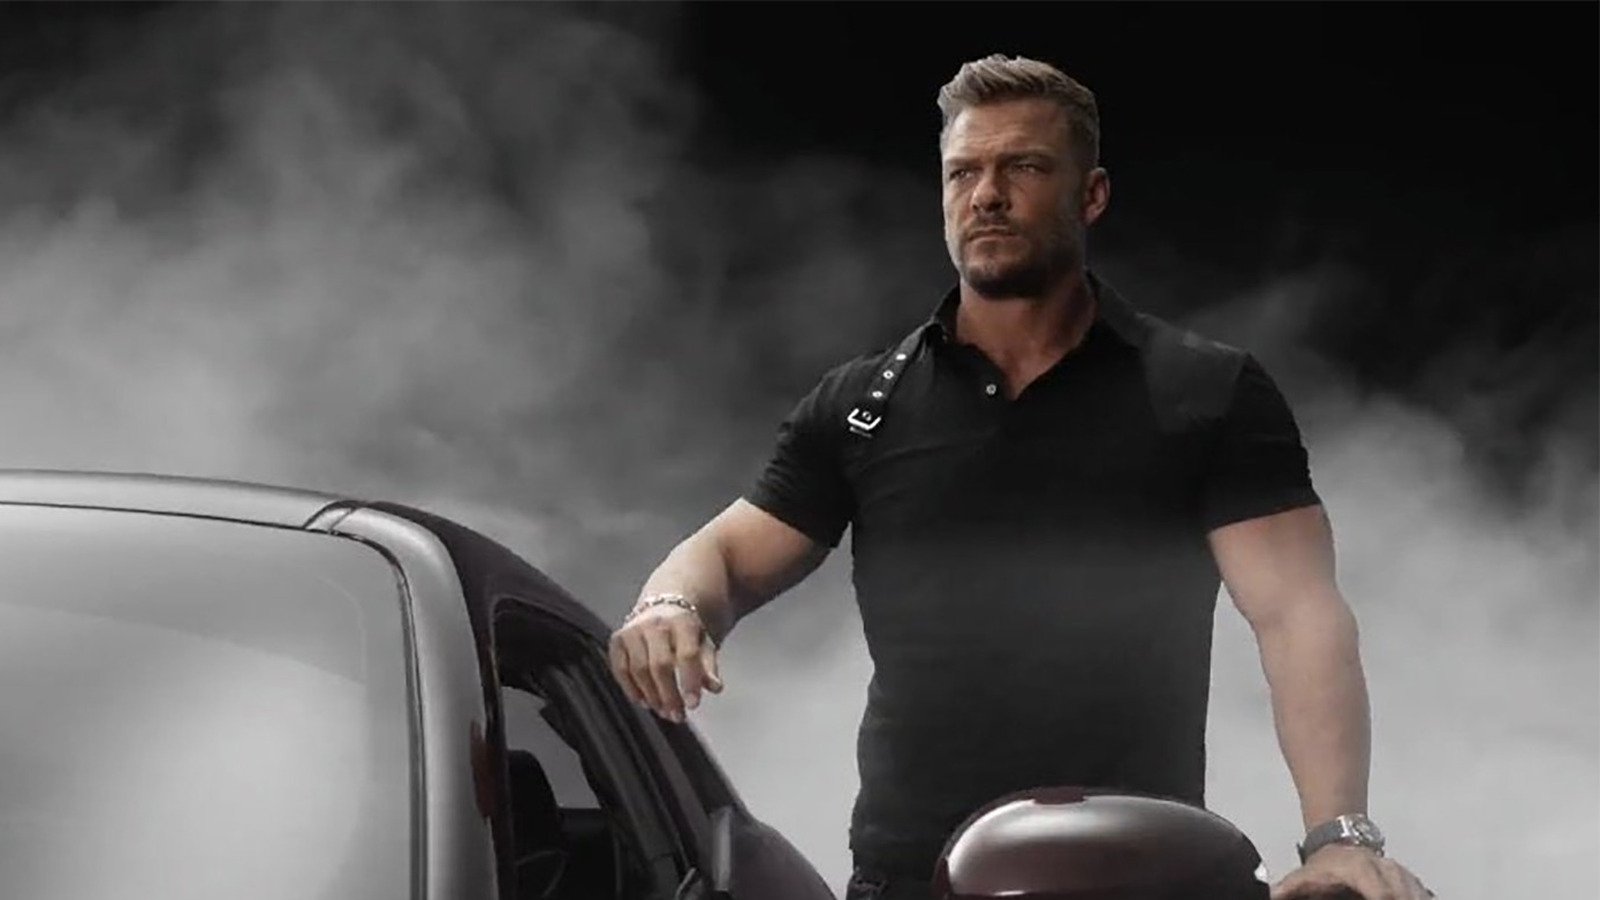 Fast X Almost Made Jason Momoa and Alan Ritchson New Brother Characters